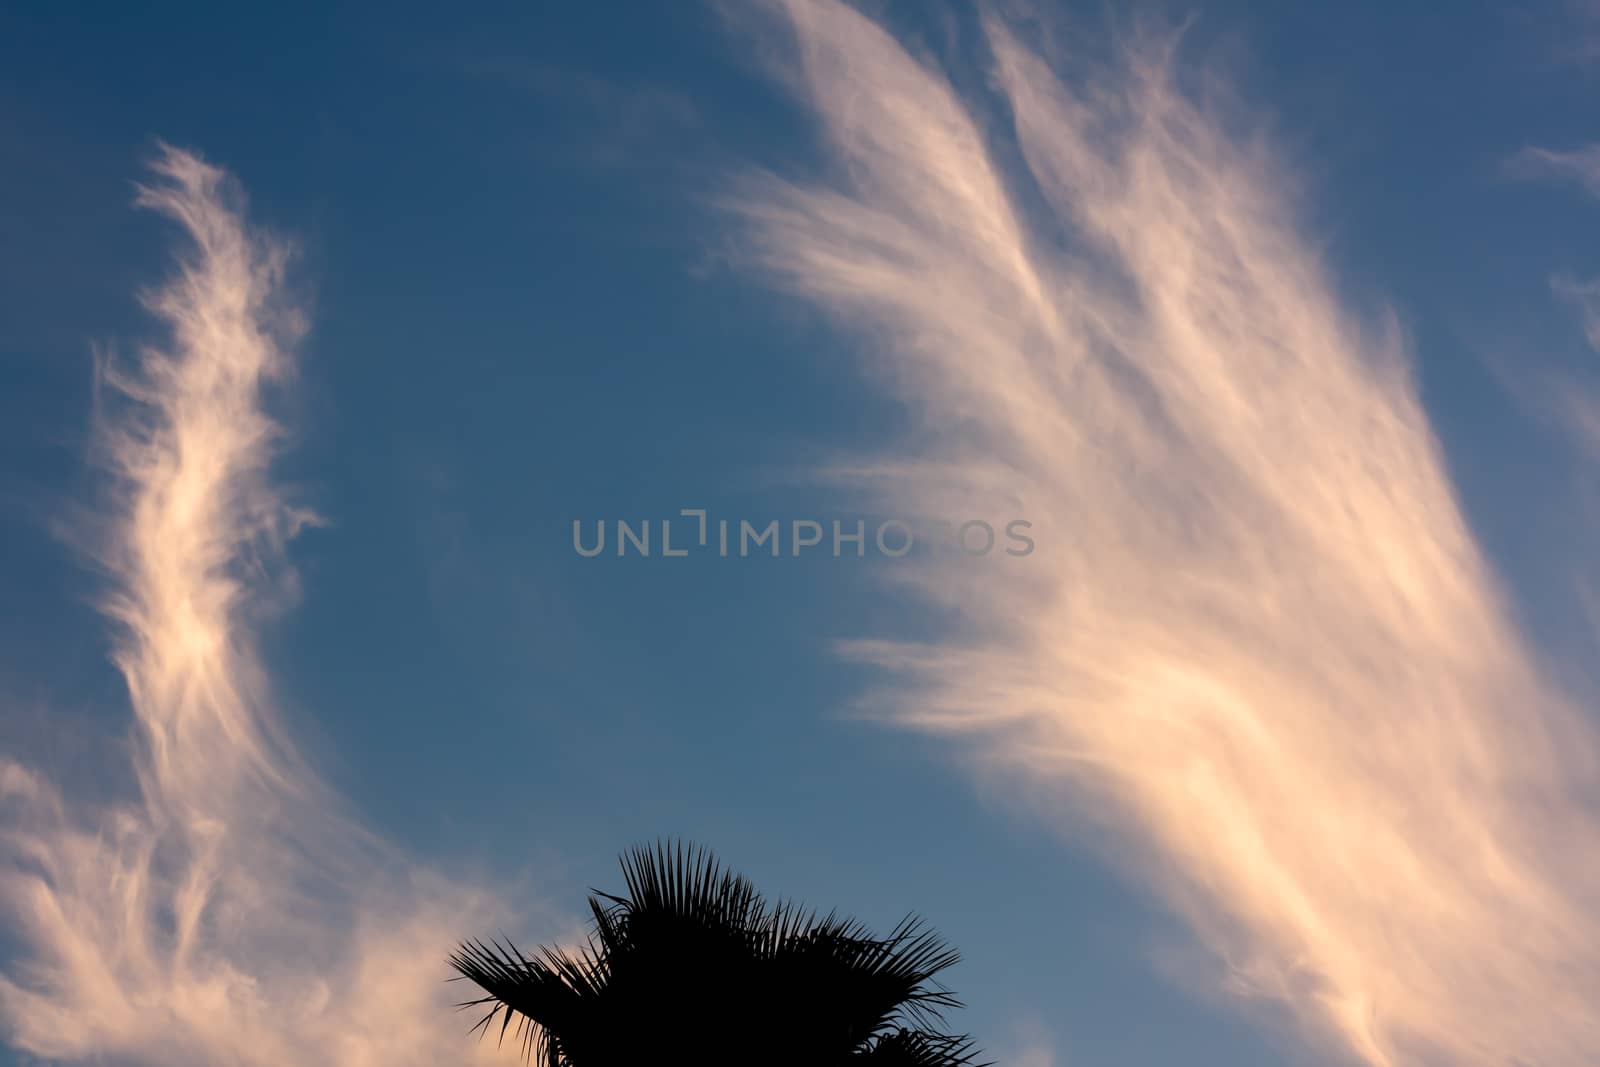 This is an image of cirrus clouds moving over Tampa, Florida. Cirrus clouds are wispy, feathery strands of ice crystals. These clouds are also known as mare's tails.